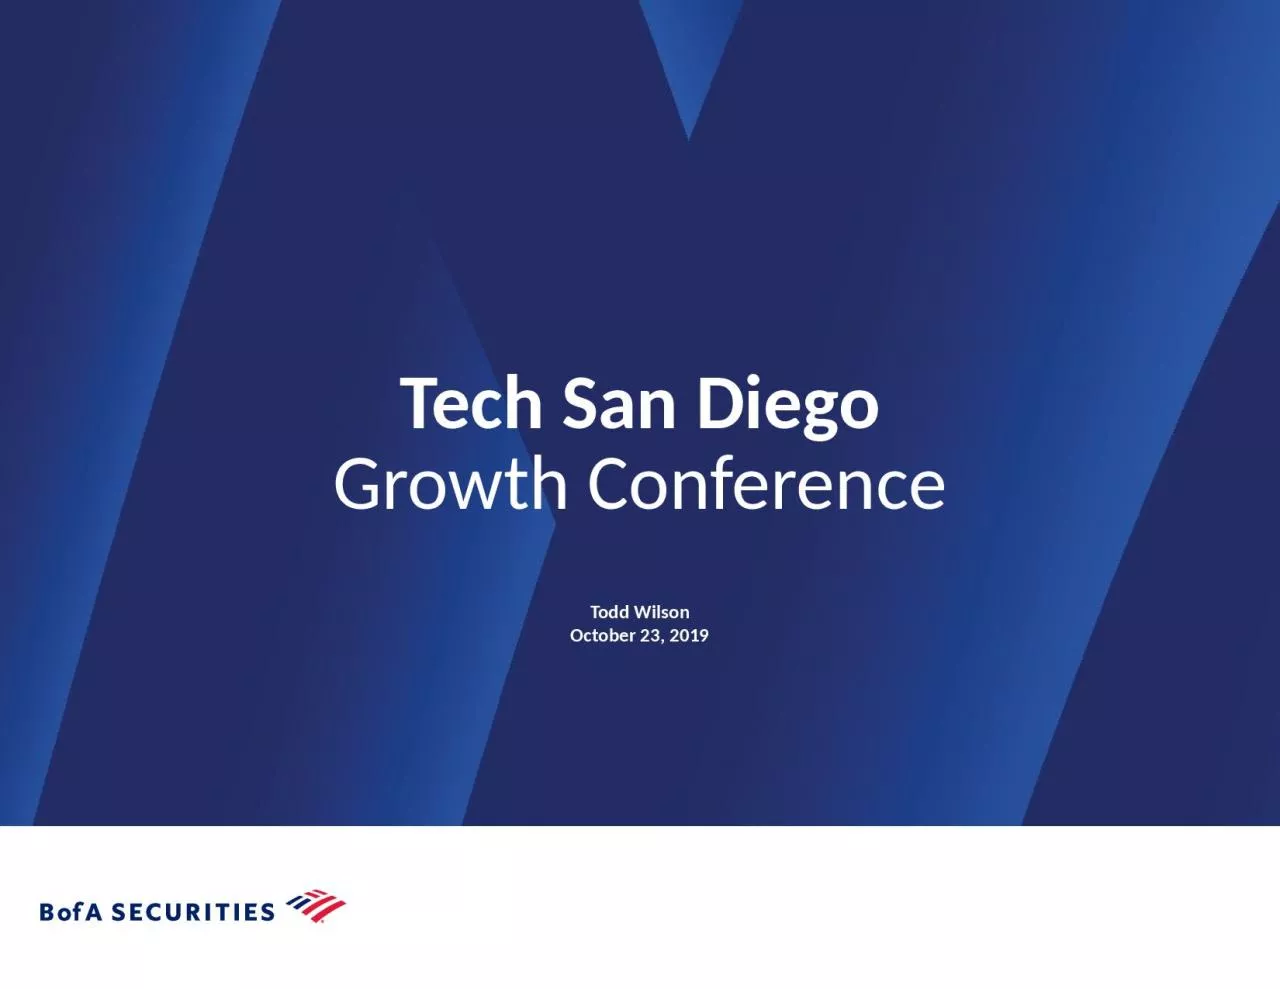 Tech San Diego Growth Conference